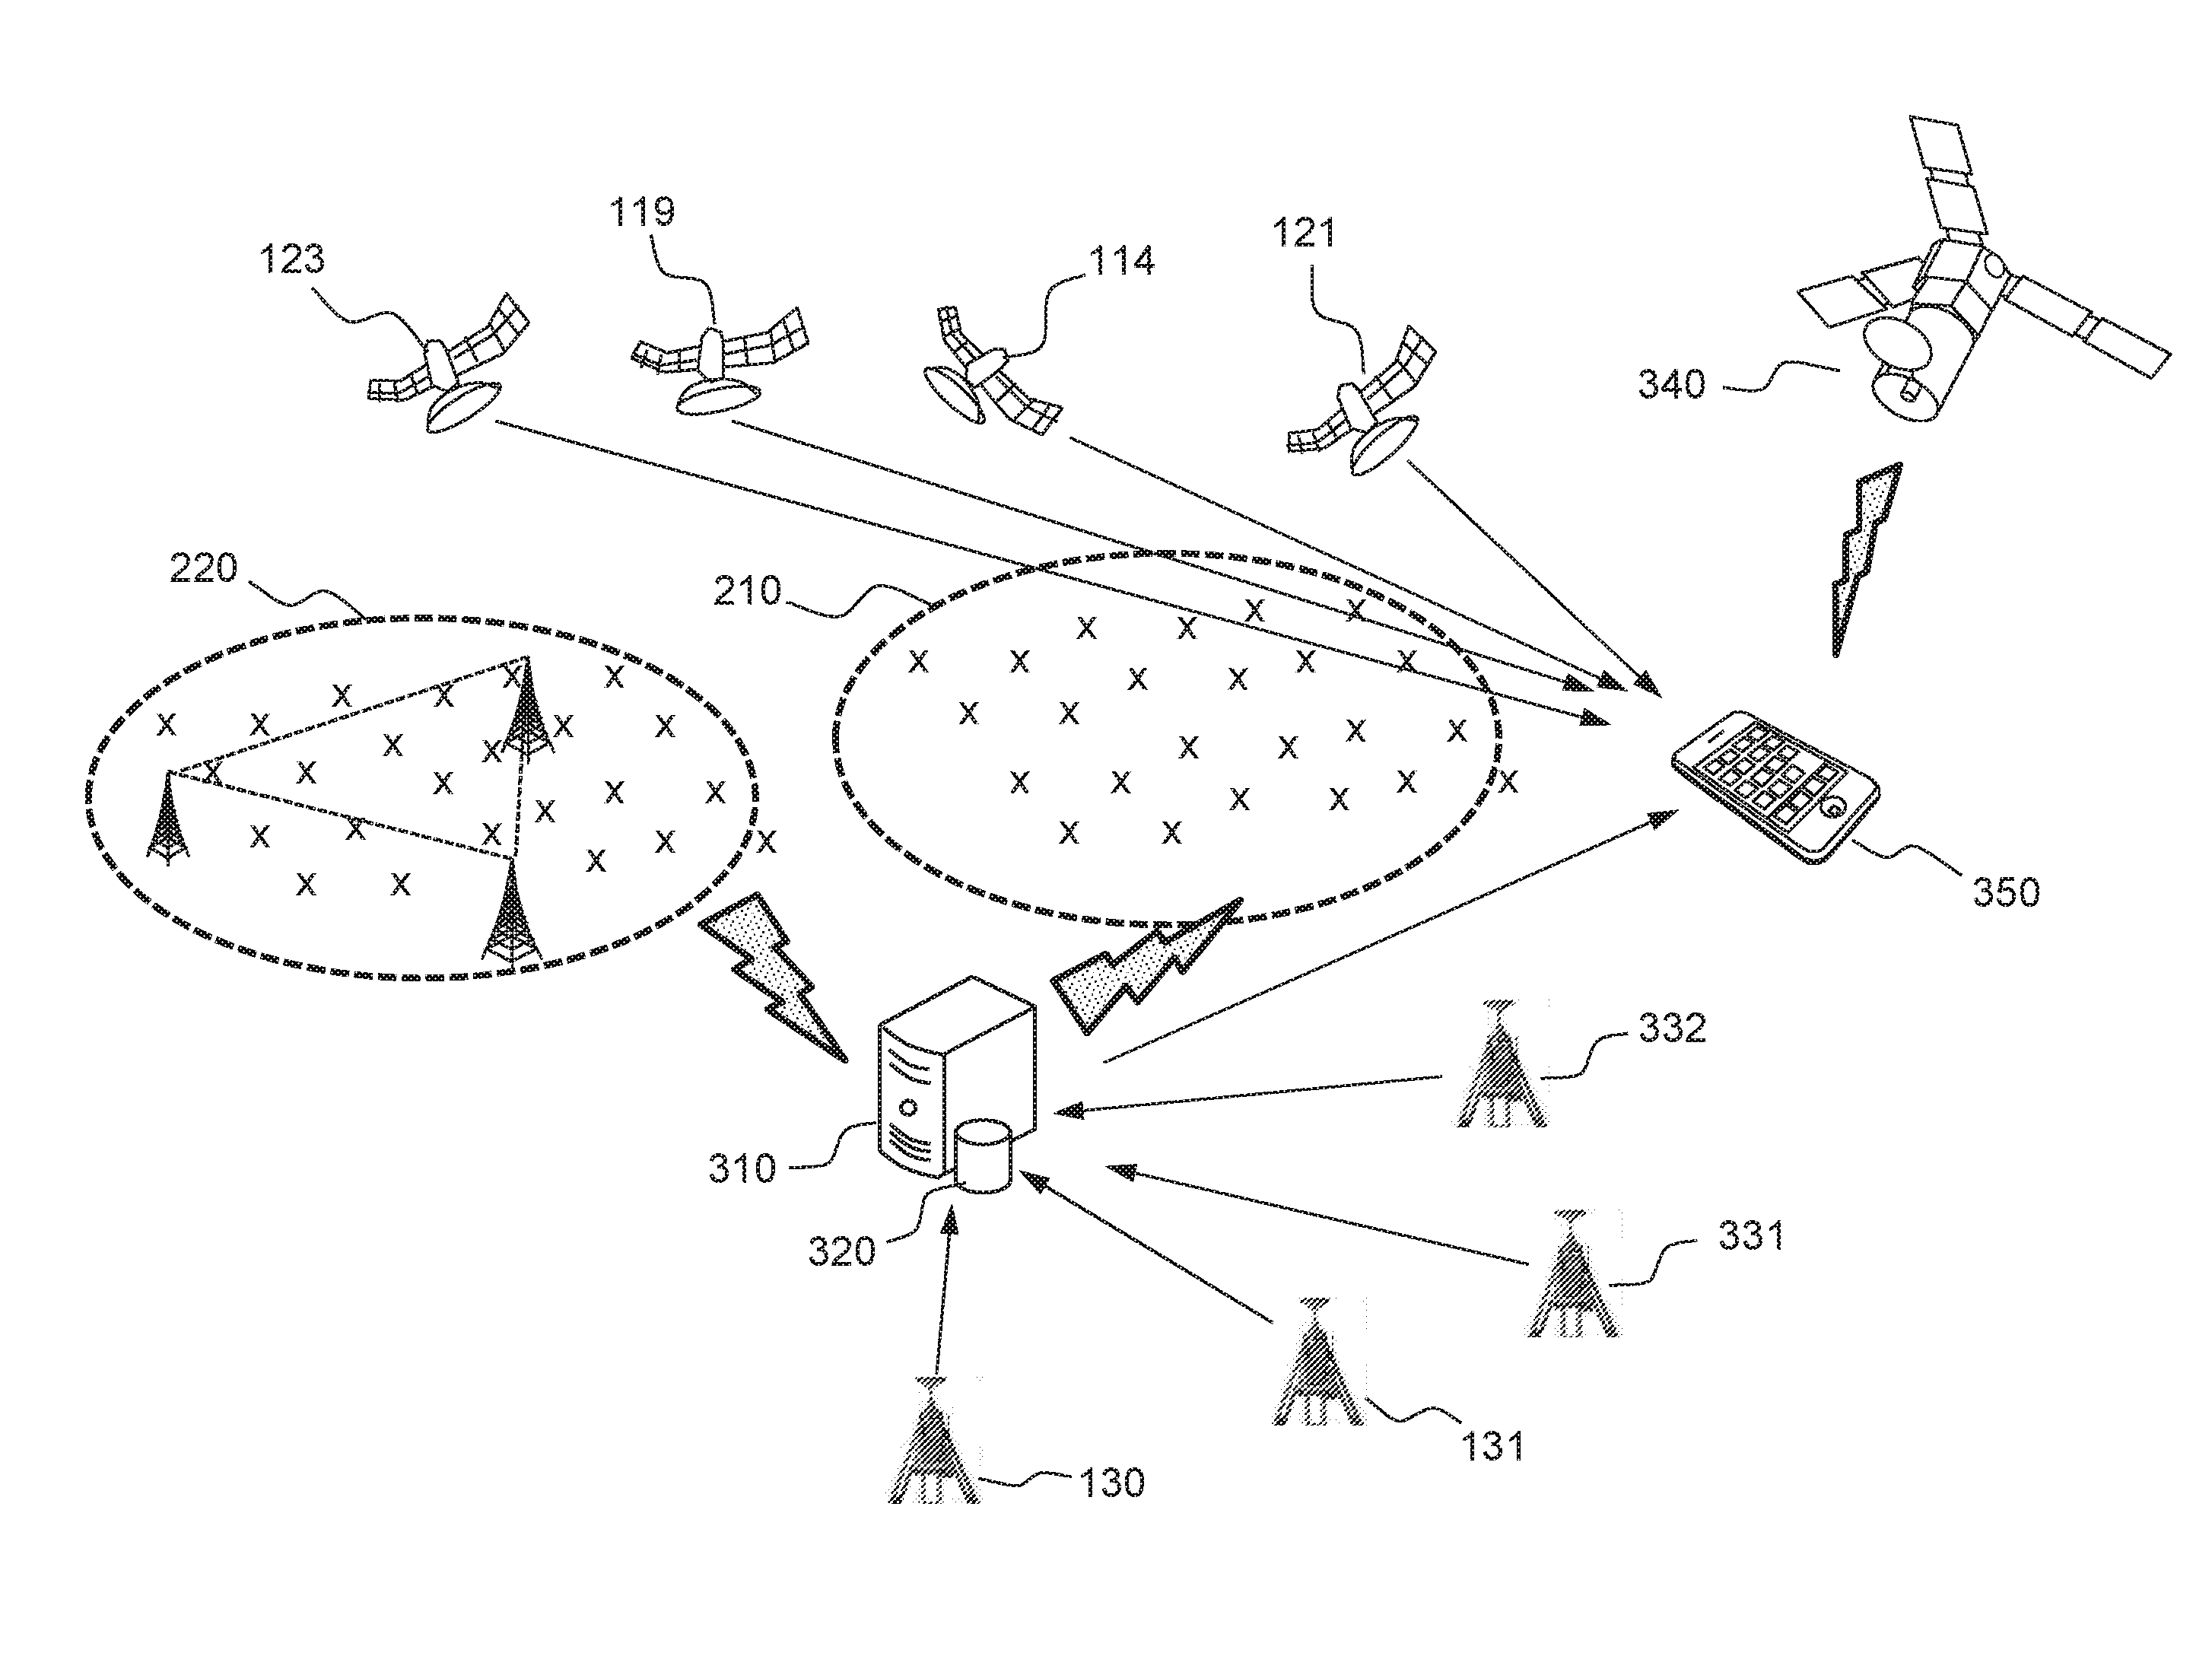 GNSS receiver with an on-board capability to implement an optimal error correction mode